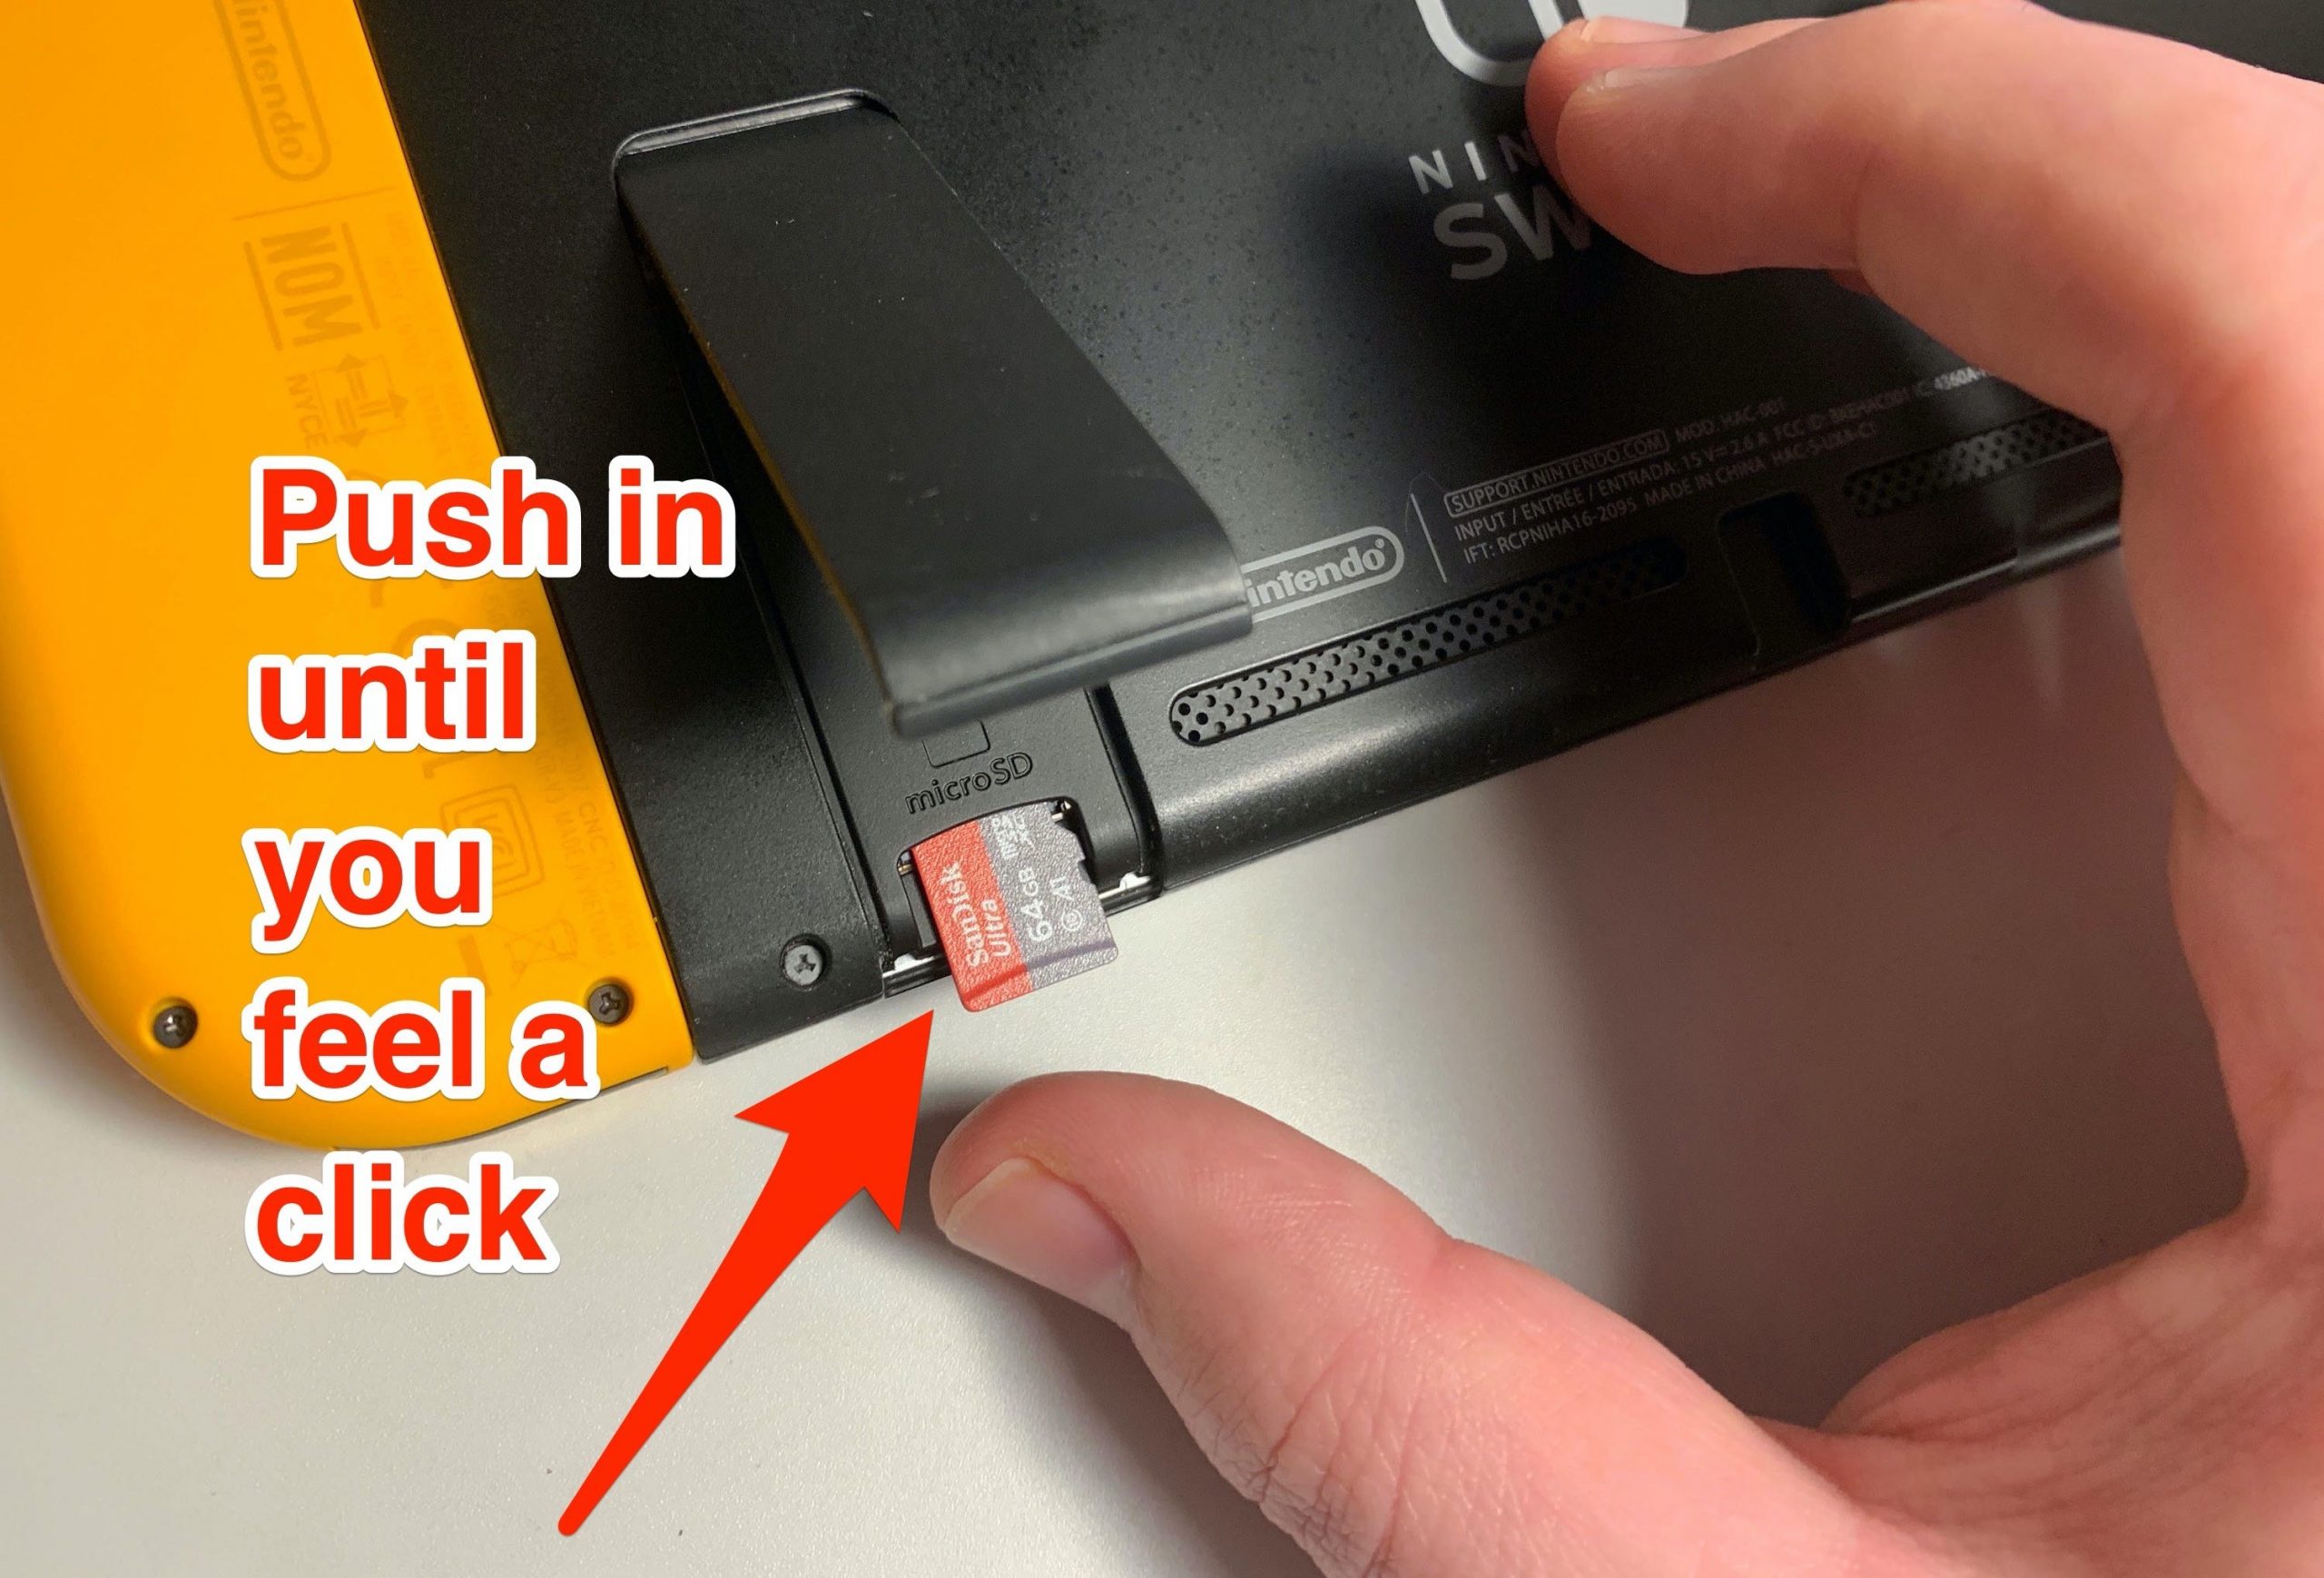 donor veiligheid gokken The Nintendo Switch uses microSD cards - here's what size you should buy,  and how to install it